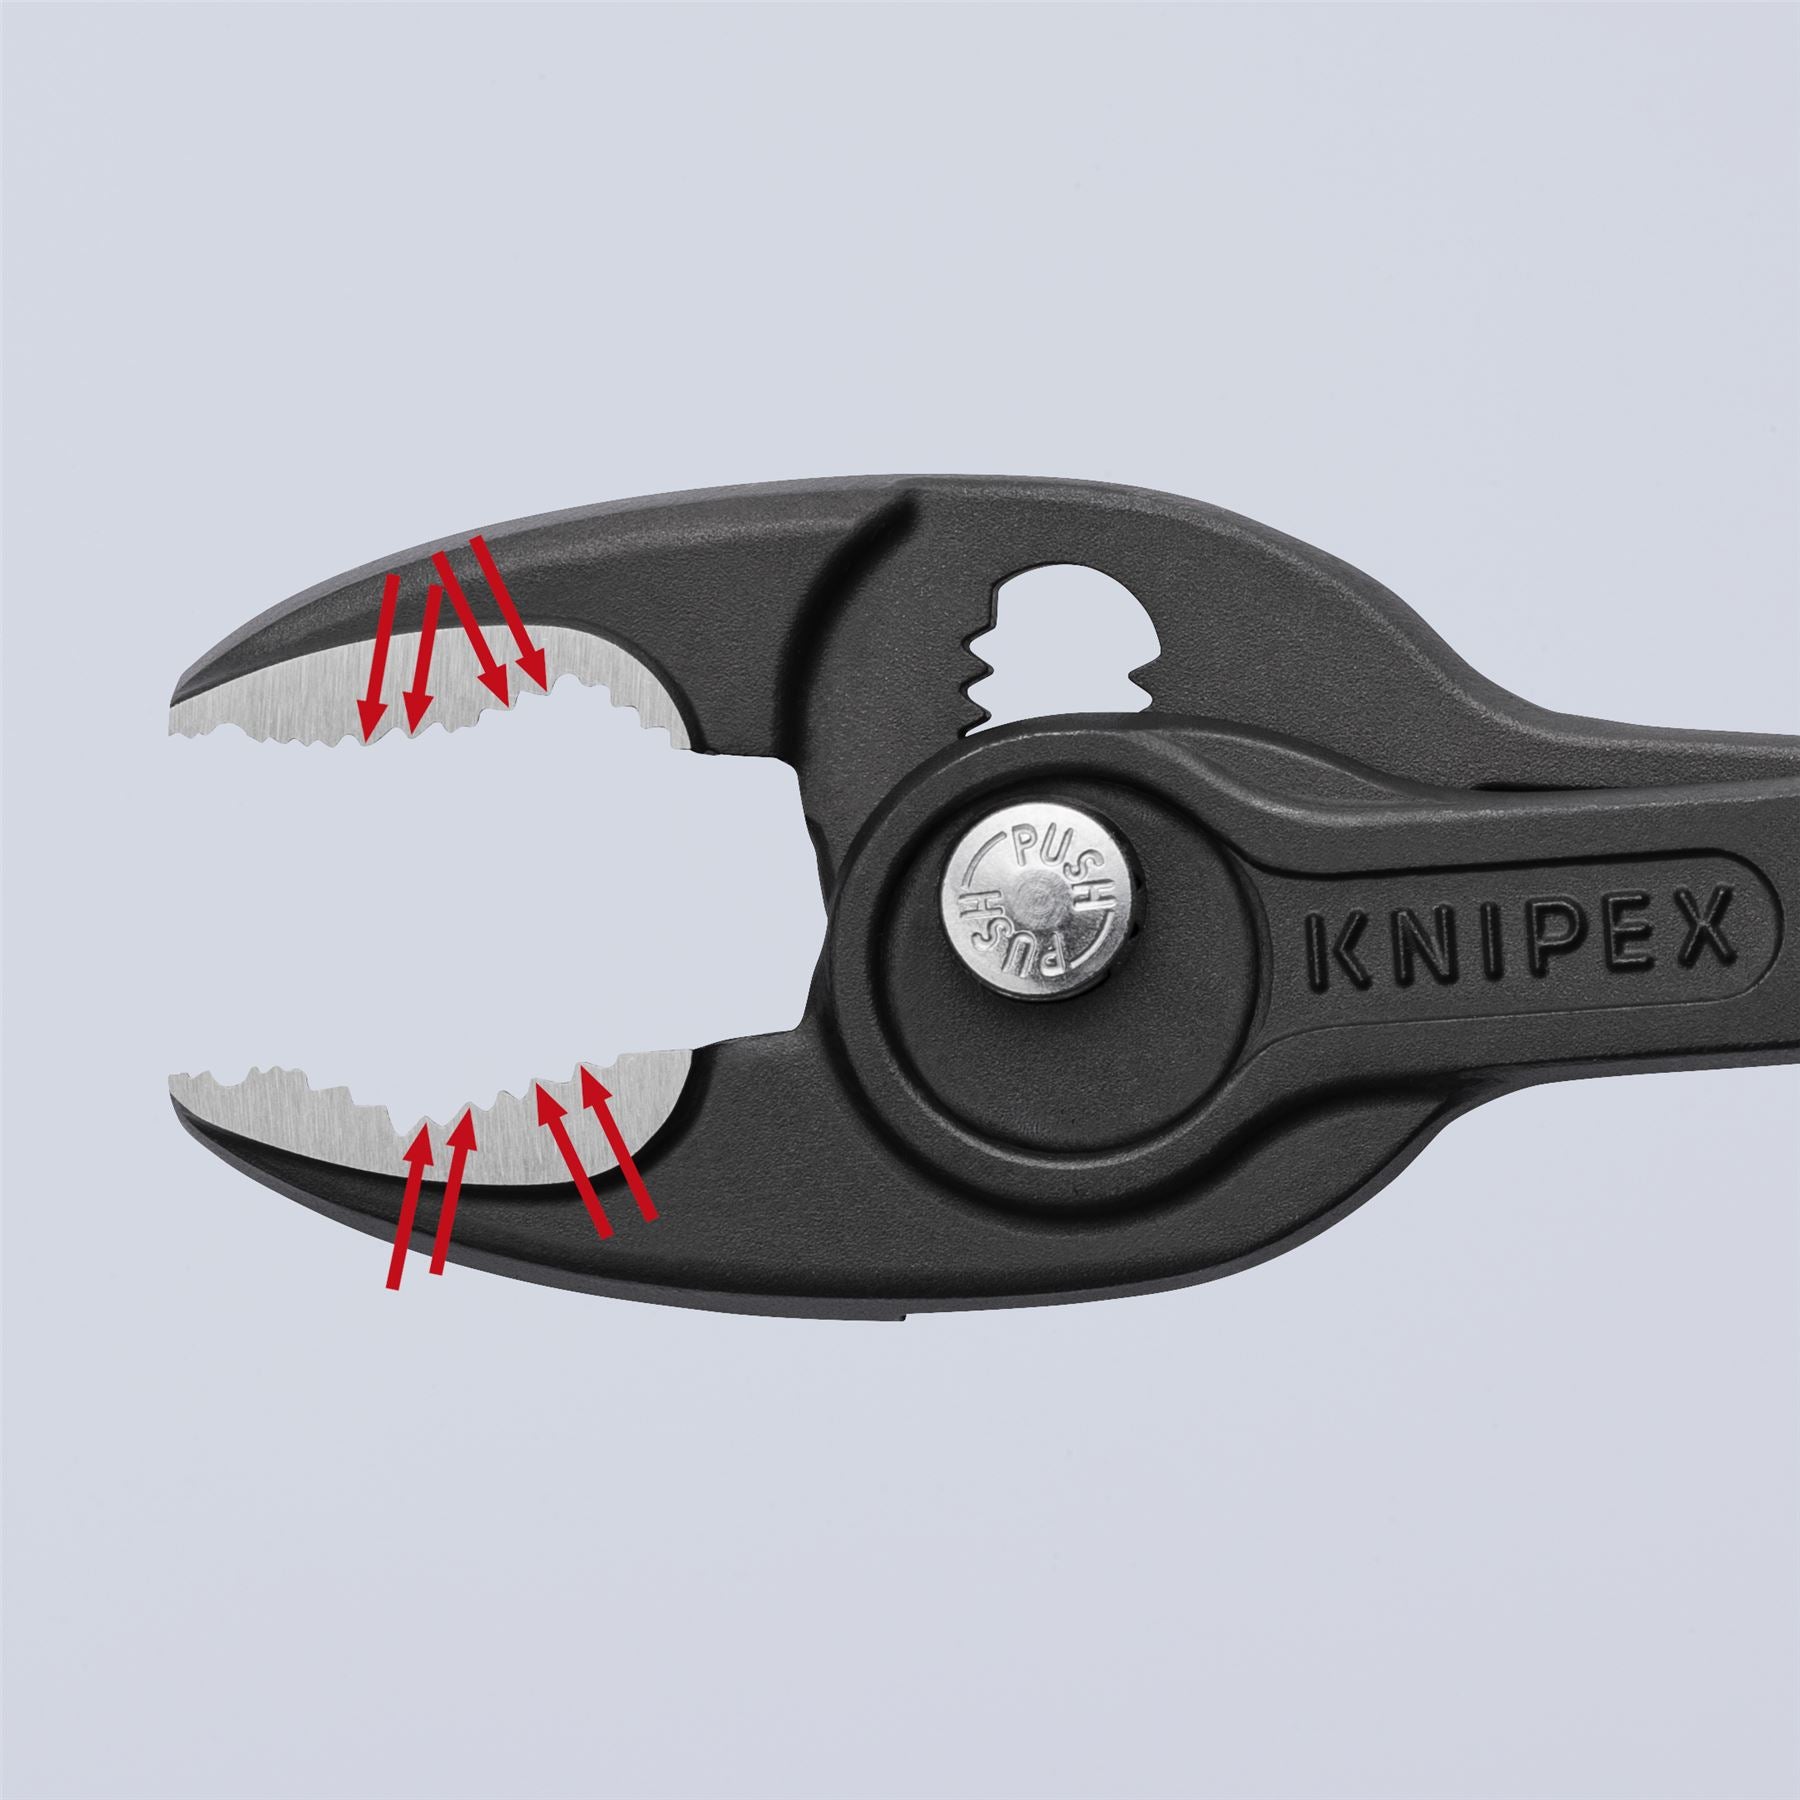 KNIPEX TwinGrip Slip Joint Pliers Front and Side Grip 200mm Plastic Coated Handles 82 01 200 SB